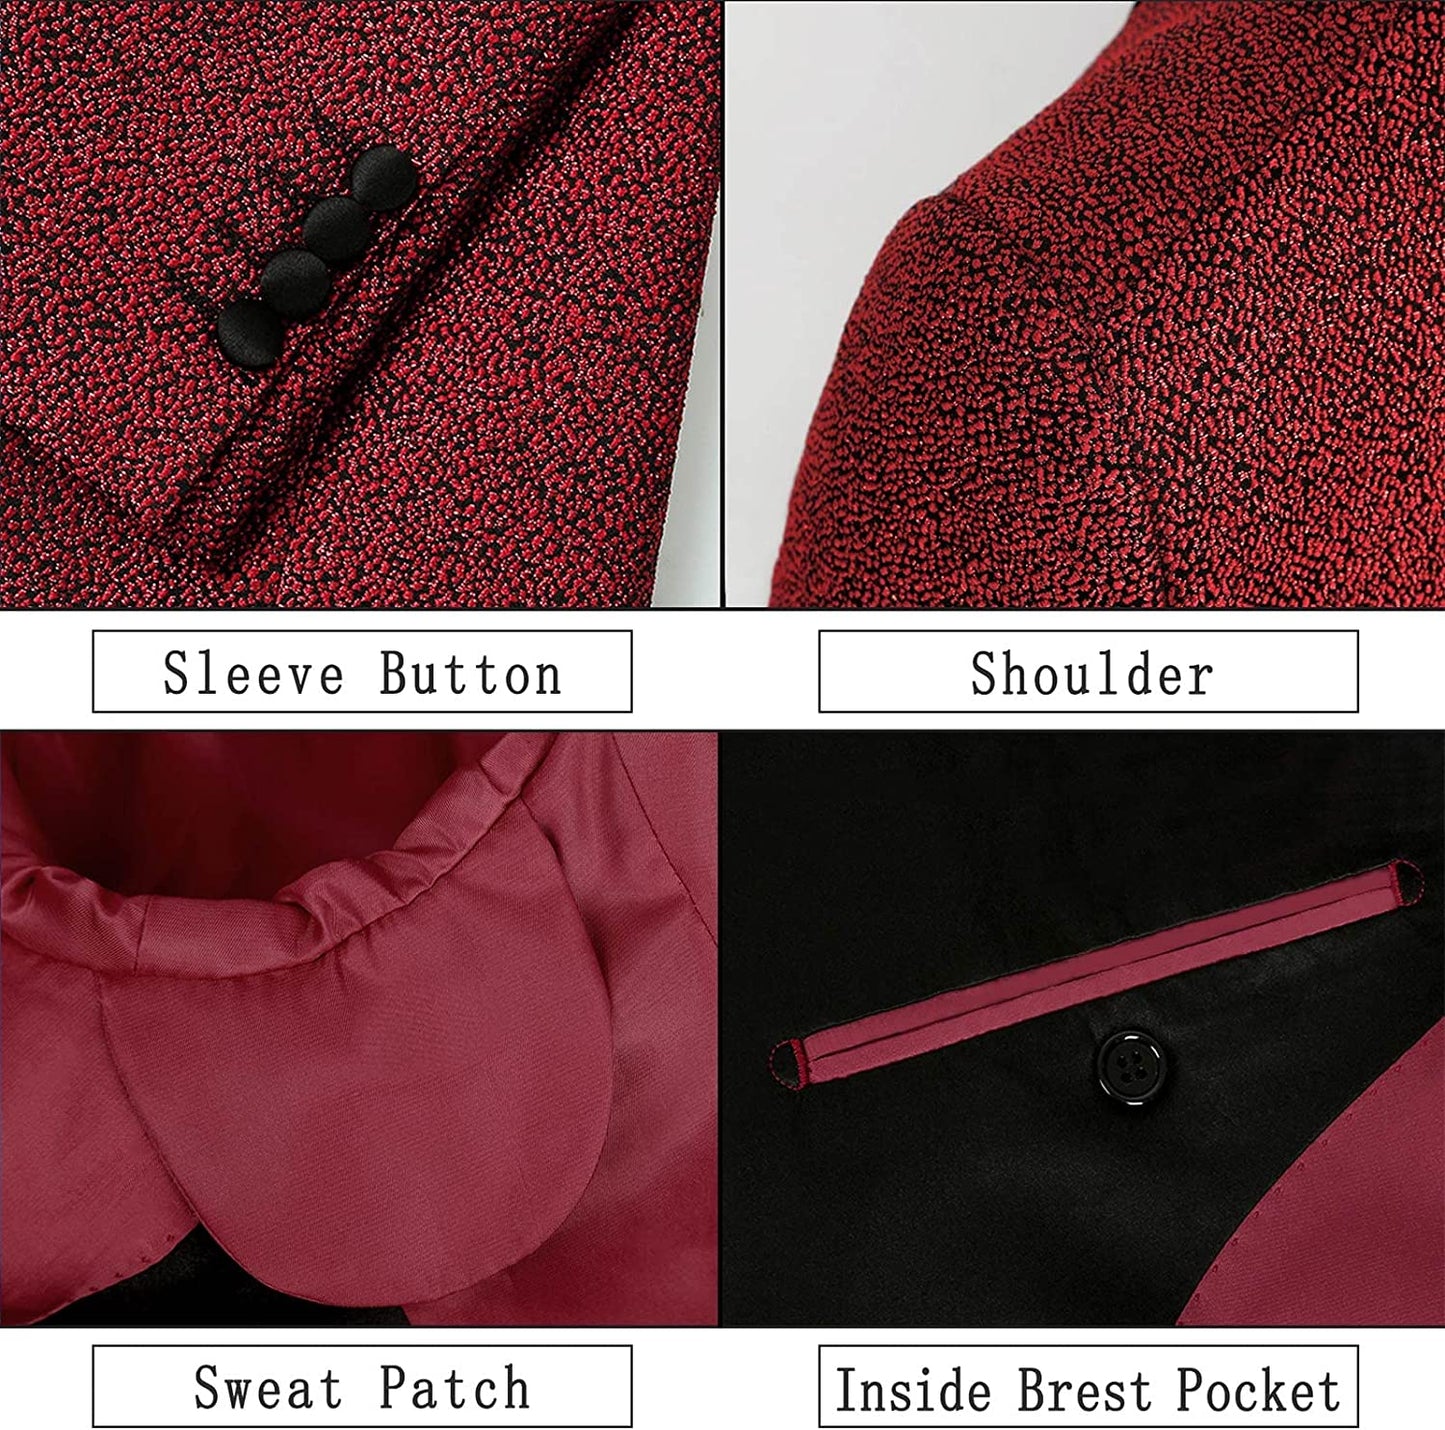 Men's Tuxedos Shawl Lapel One Button Fashion Jacquard Suit Blazer Jacket for Party Prom Wedding, 027-Wine Red